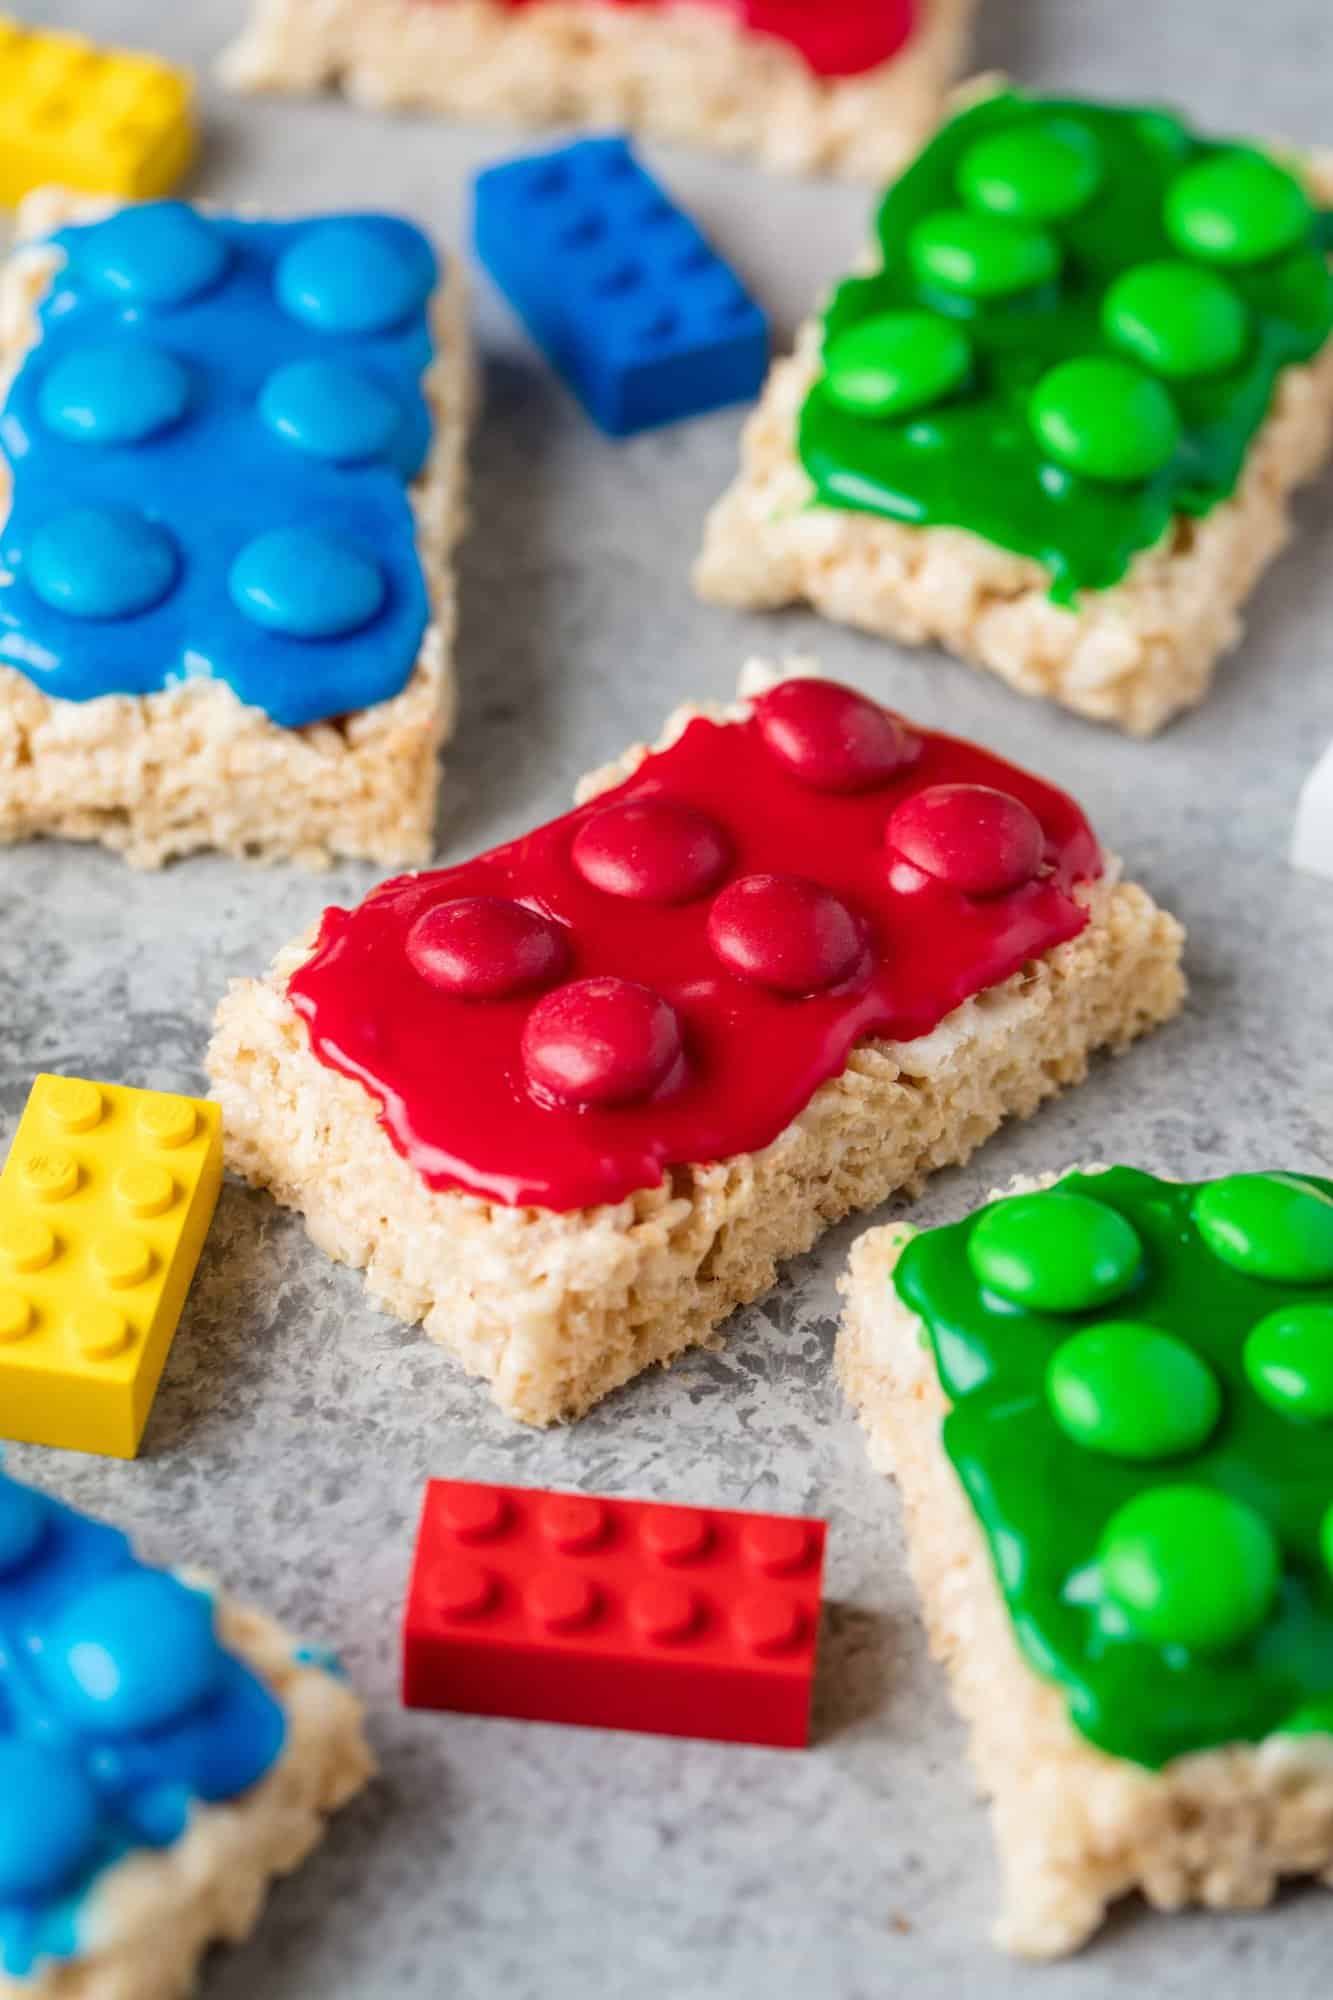 Lego Rice Krispie Treats frosted with various colors and topped with M&Ms to look like toy Legos